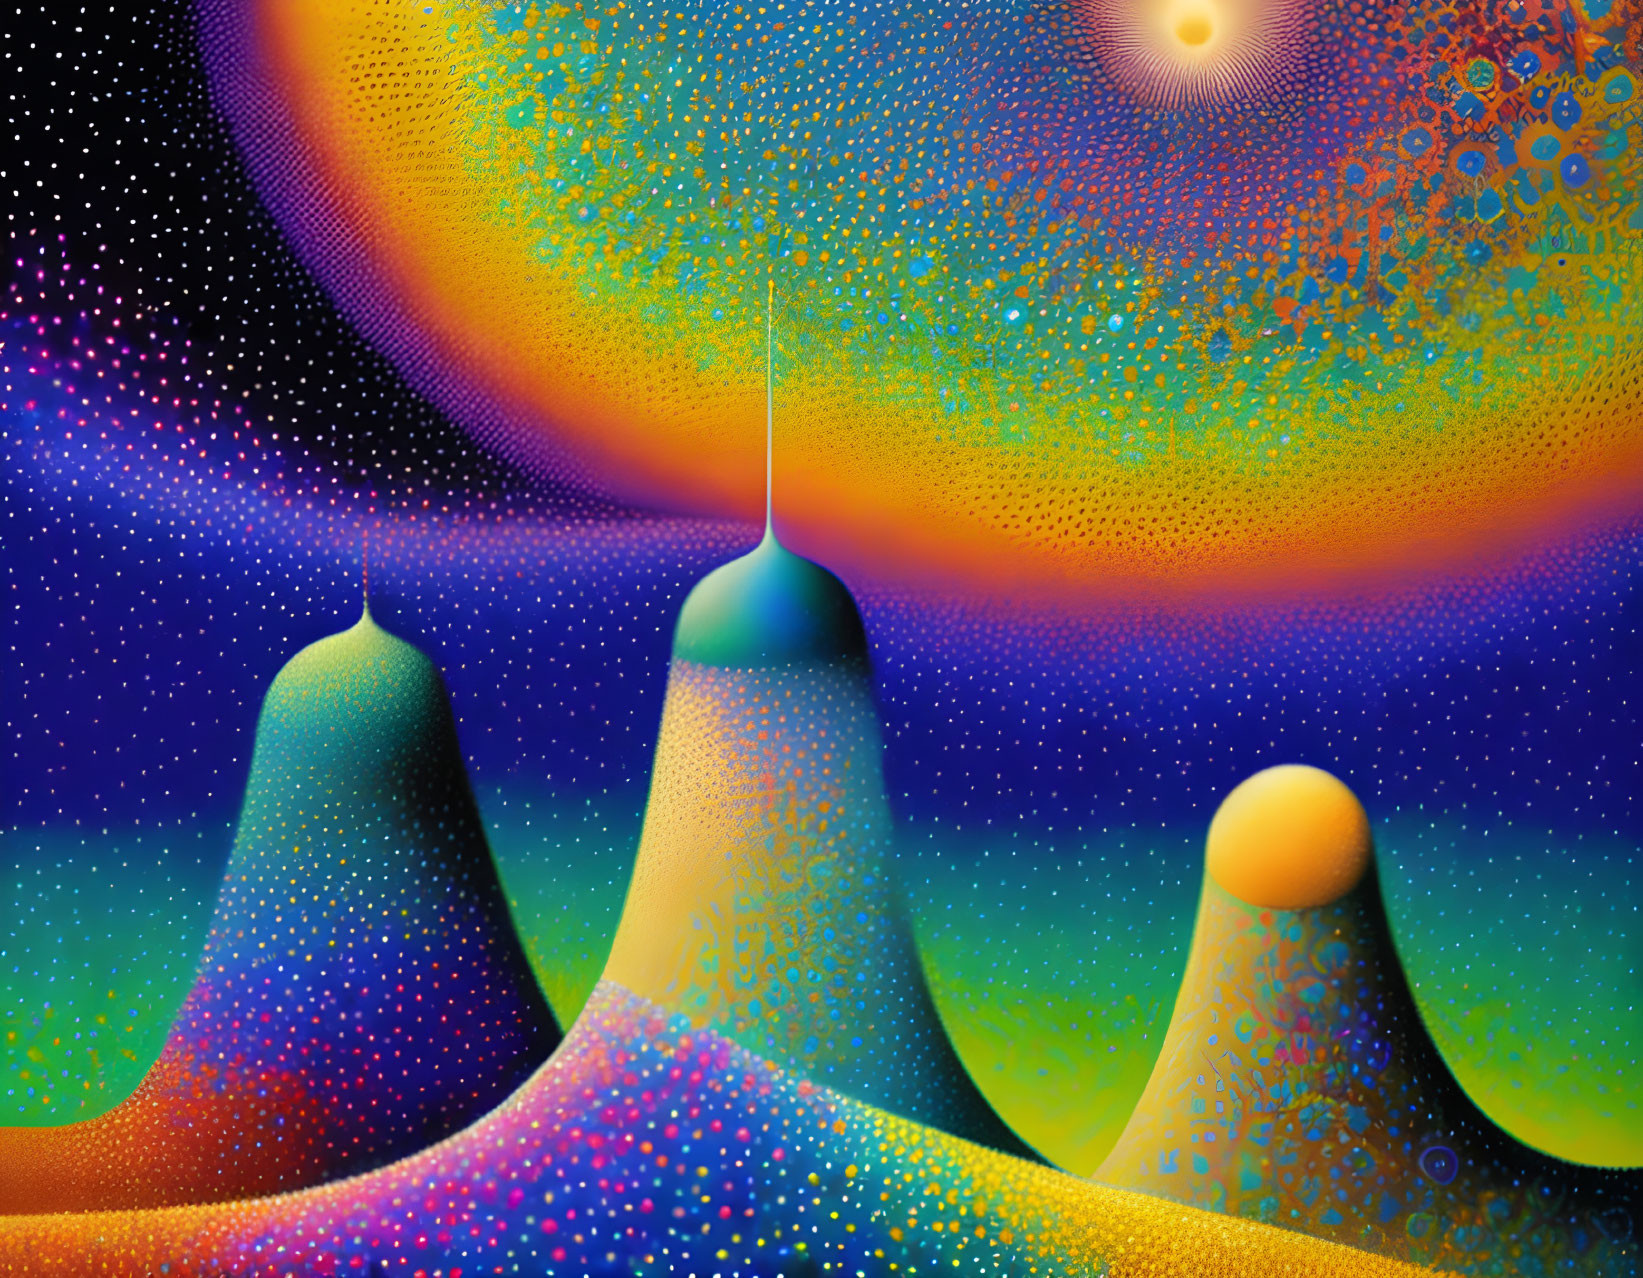 Colorful digital art: Three pointed hills under starry sky with radiant sun/moon, psychedelic dotted